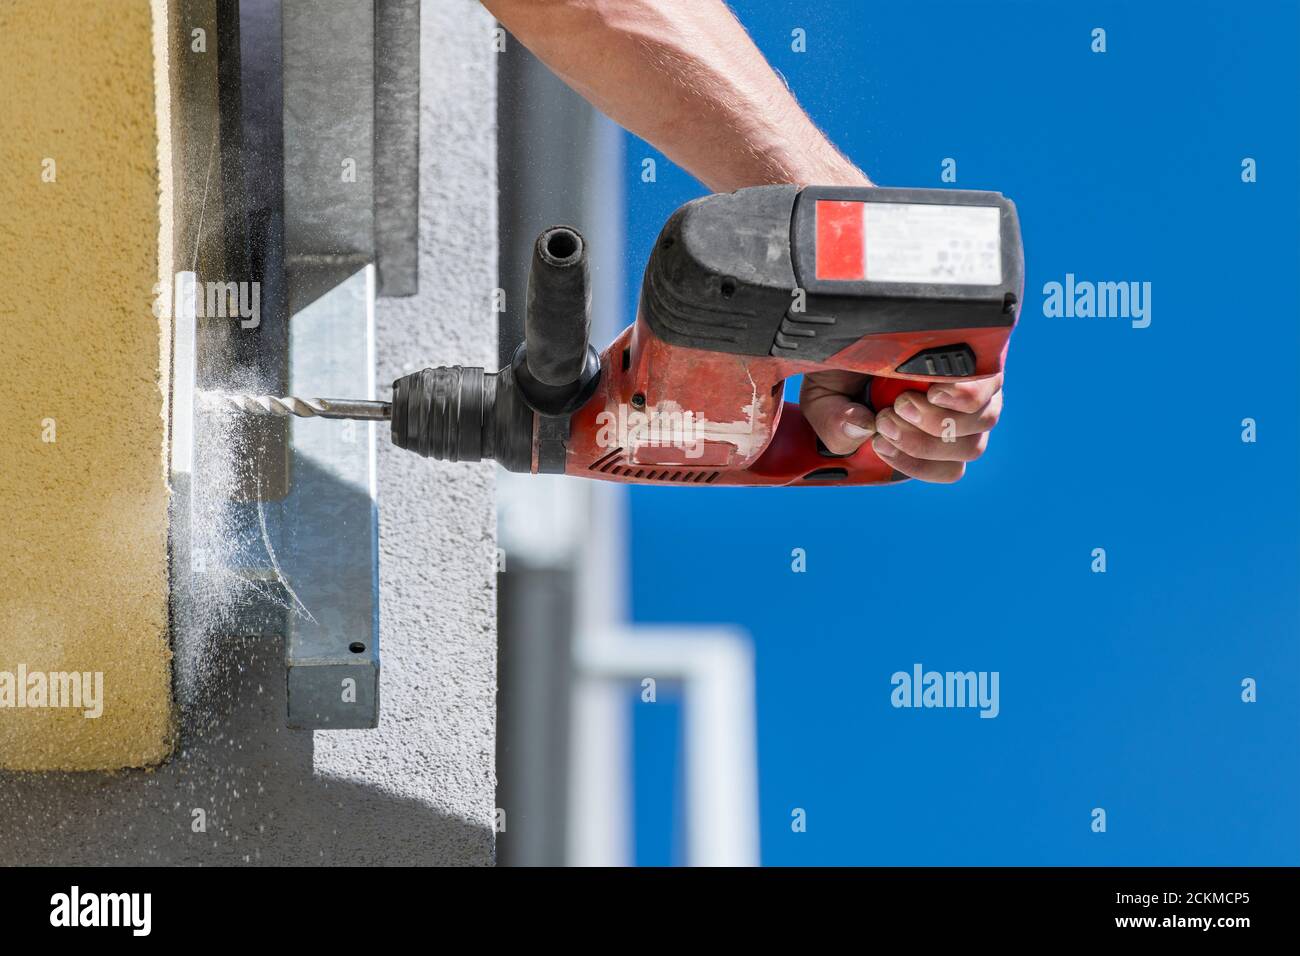 Working power hammer drill. Anchoring a steel construction. Fixing  into building masonry. Hand holding cordless drilling machine. Falling dust detail. Stock Photo